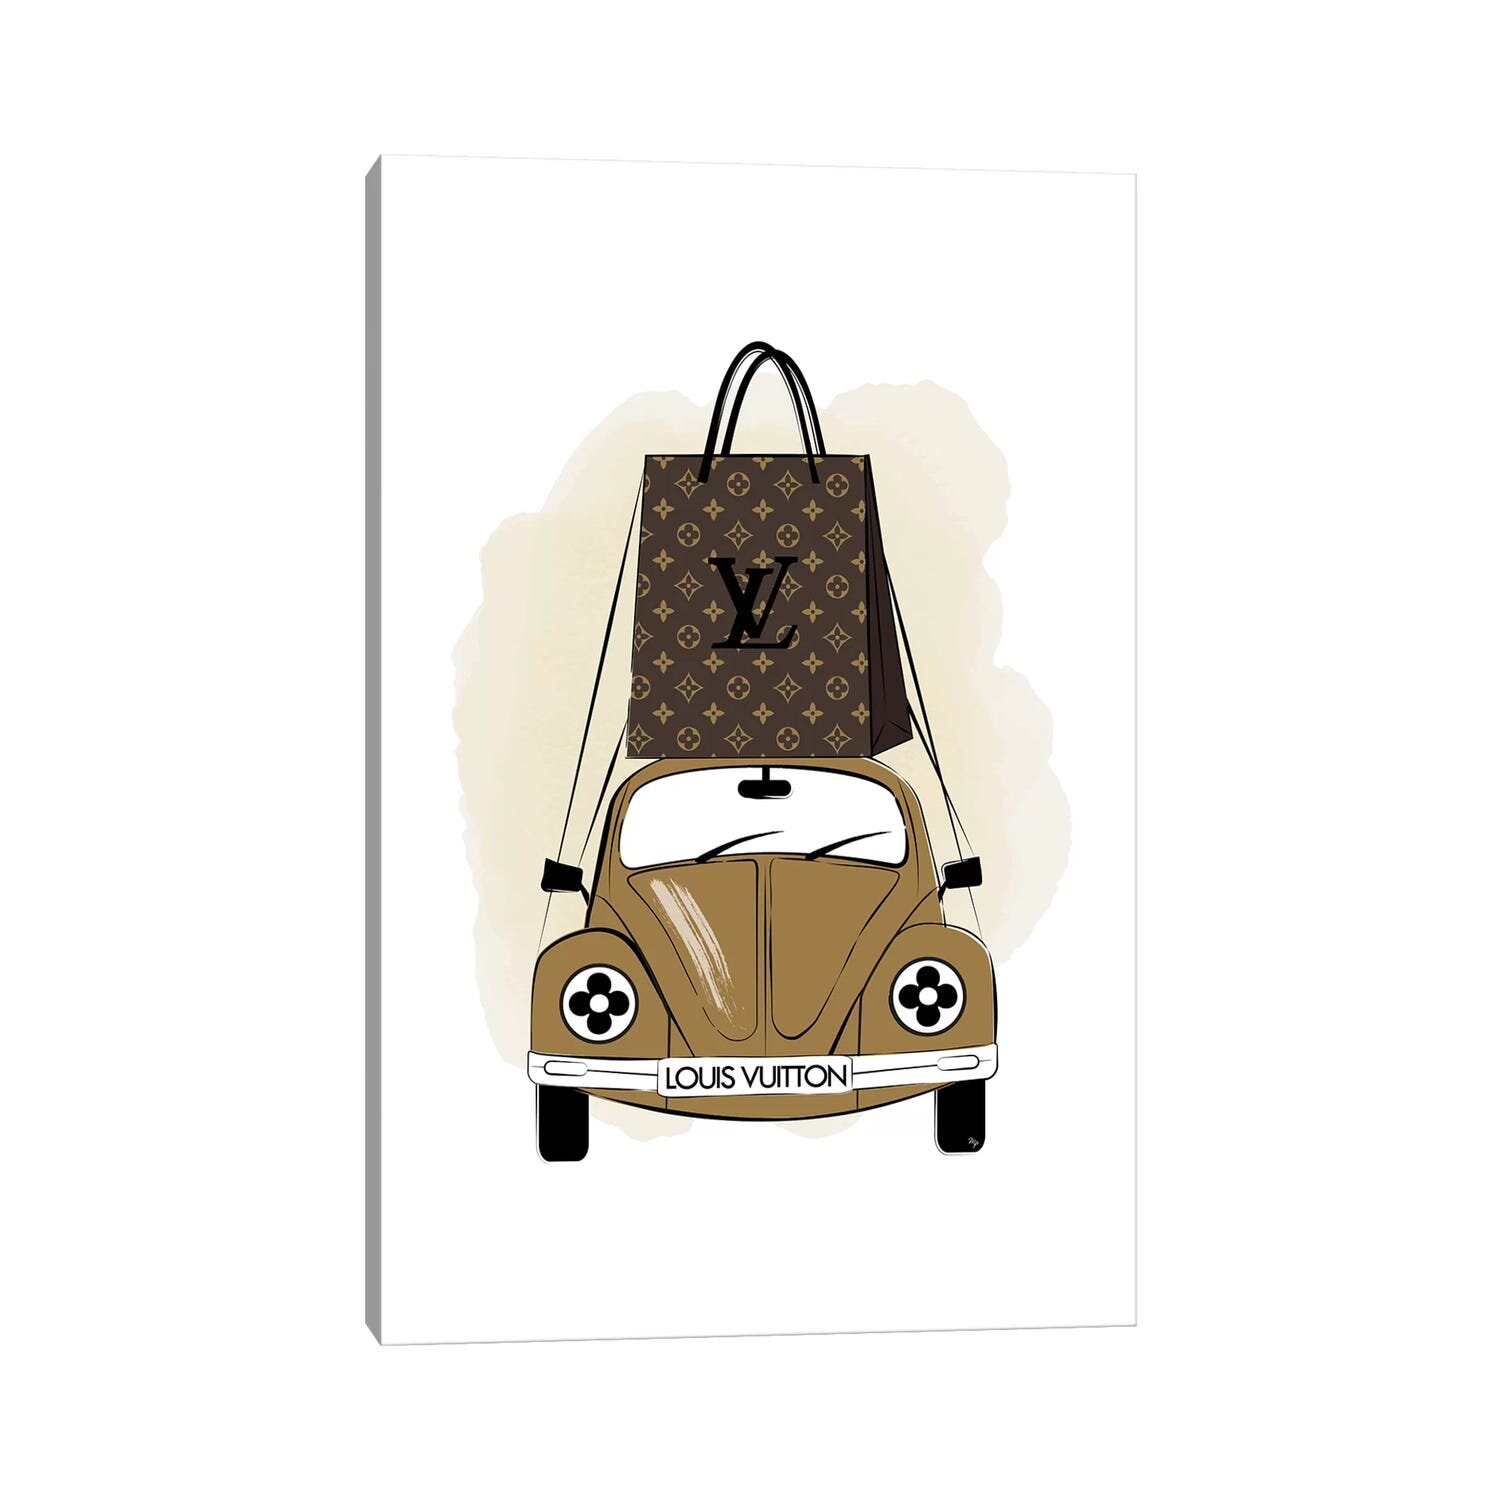 LV Car by Martina Pavlova - Wrapped Canvas Painting Print East Urban Home Size: 12 H x 8 W x 0.75 D